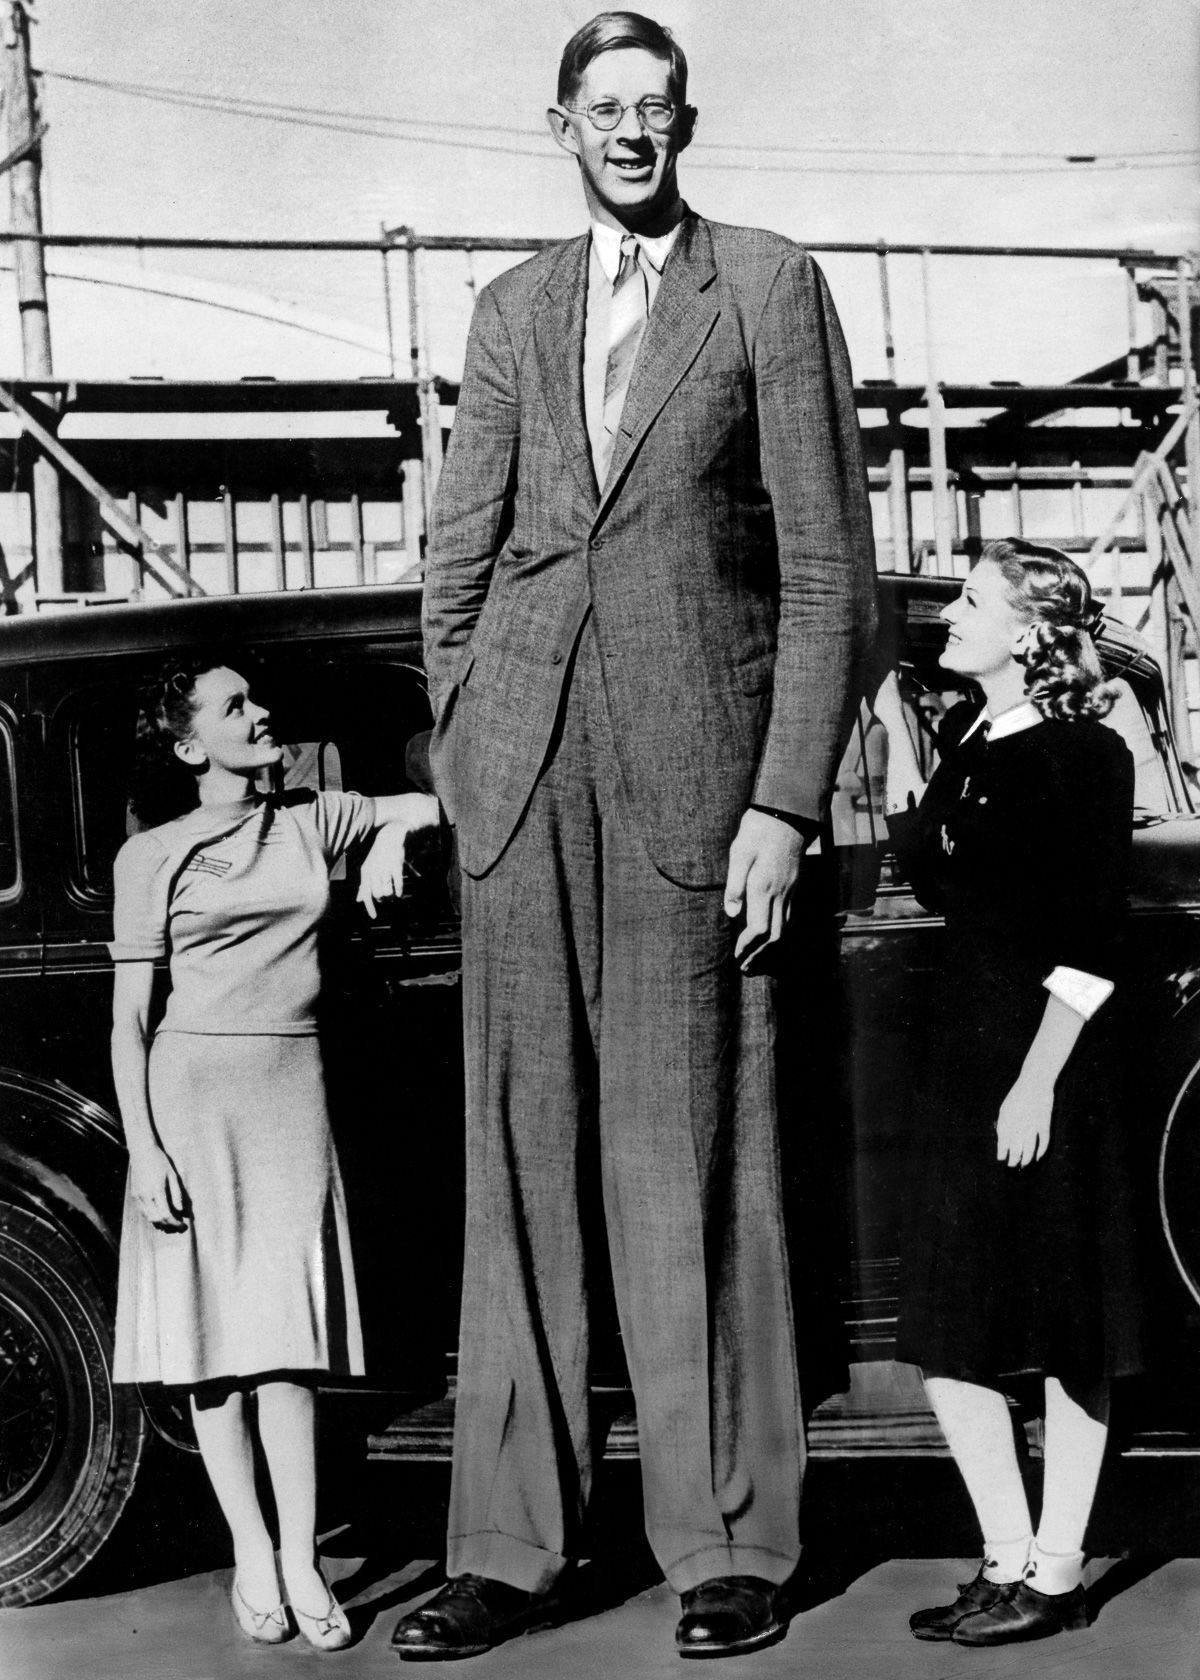 Robert Wadlow, the tallest man ever recorded and confirmed at 8’11”, pictured here in 1939, just one year before his death